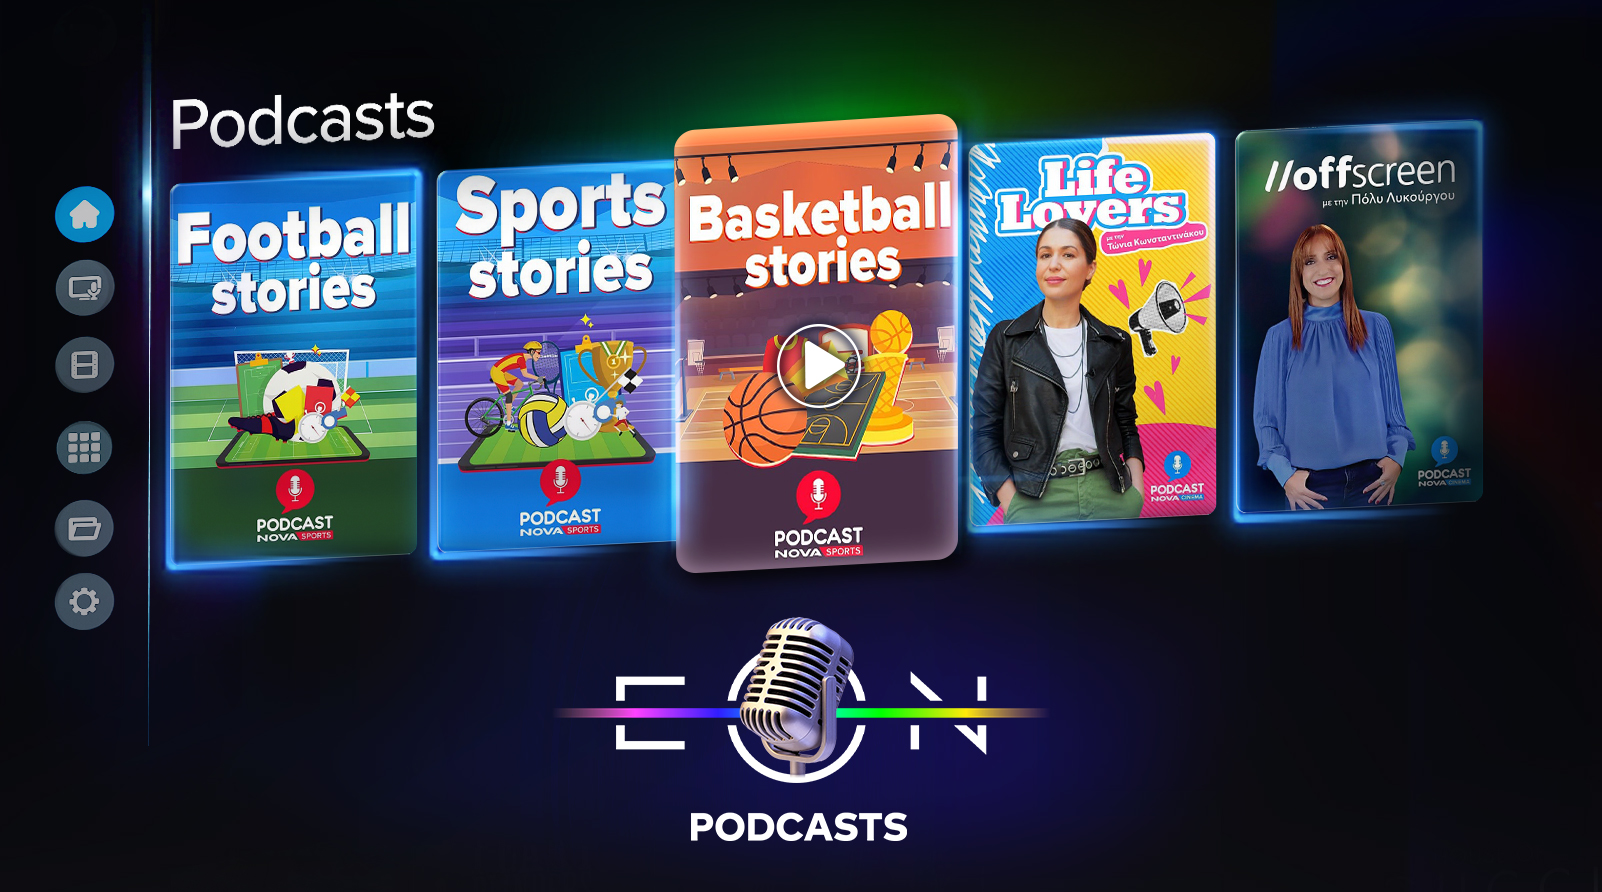 eon on demand podcasts